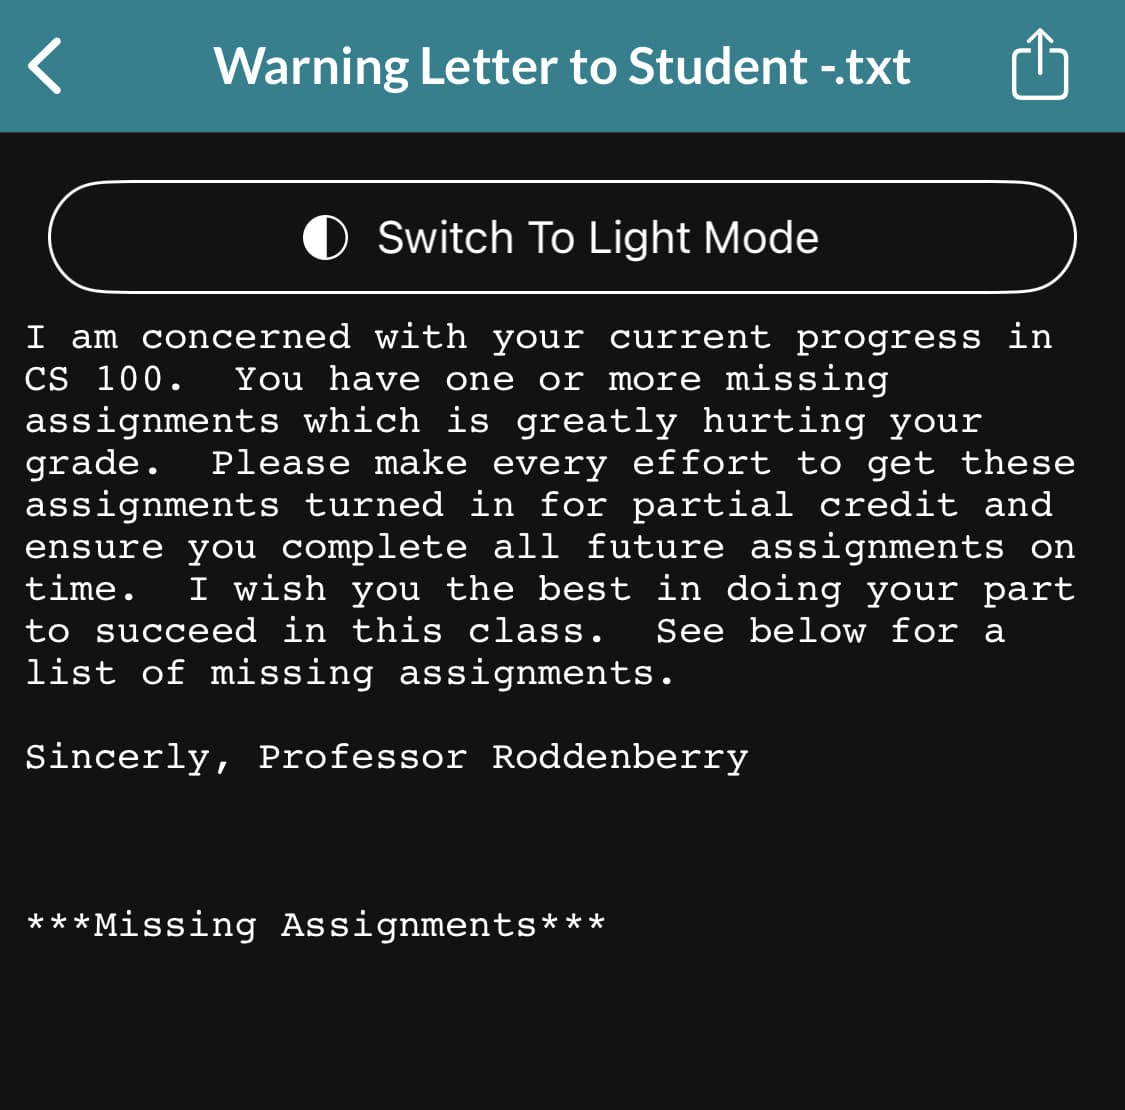 Warning Letter to Student -.txt
O Switch To Light Mode
se
I am concerned with your current progress in
CS 100. You have one or more missing
assignments which is greatly hurting your
grade. Please make every effort to get
assignments turned in for partial credit and
ensure you complete all future assignments on
time. I wish you the best in doing your part
to succeed in this class. See below for a
list of missing assignments.
Sincerly, Professor Roddenberry
***Missing Assignments***